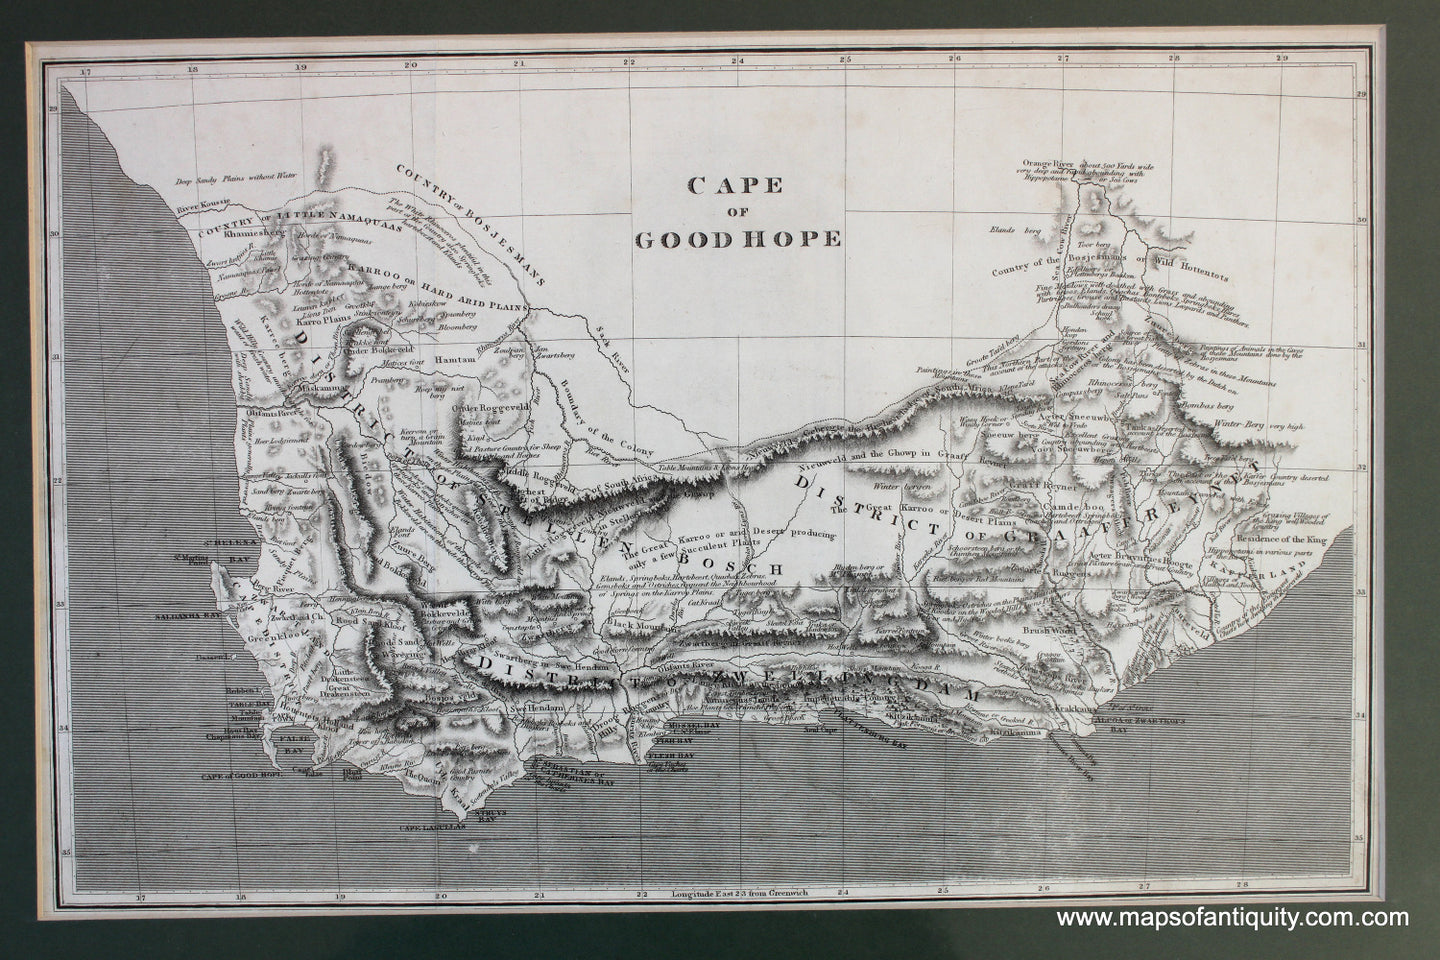 Antique-Black-and-White-Map-Cape-of-Good-Hope-****-Africa--1806-Arrowsmith-Maps-Of-Antiquity